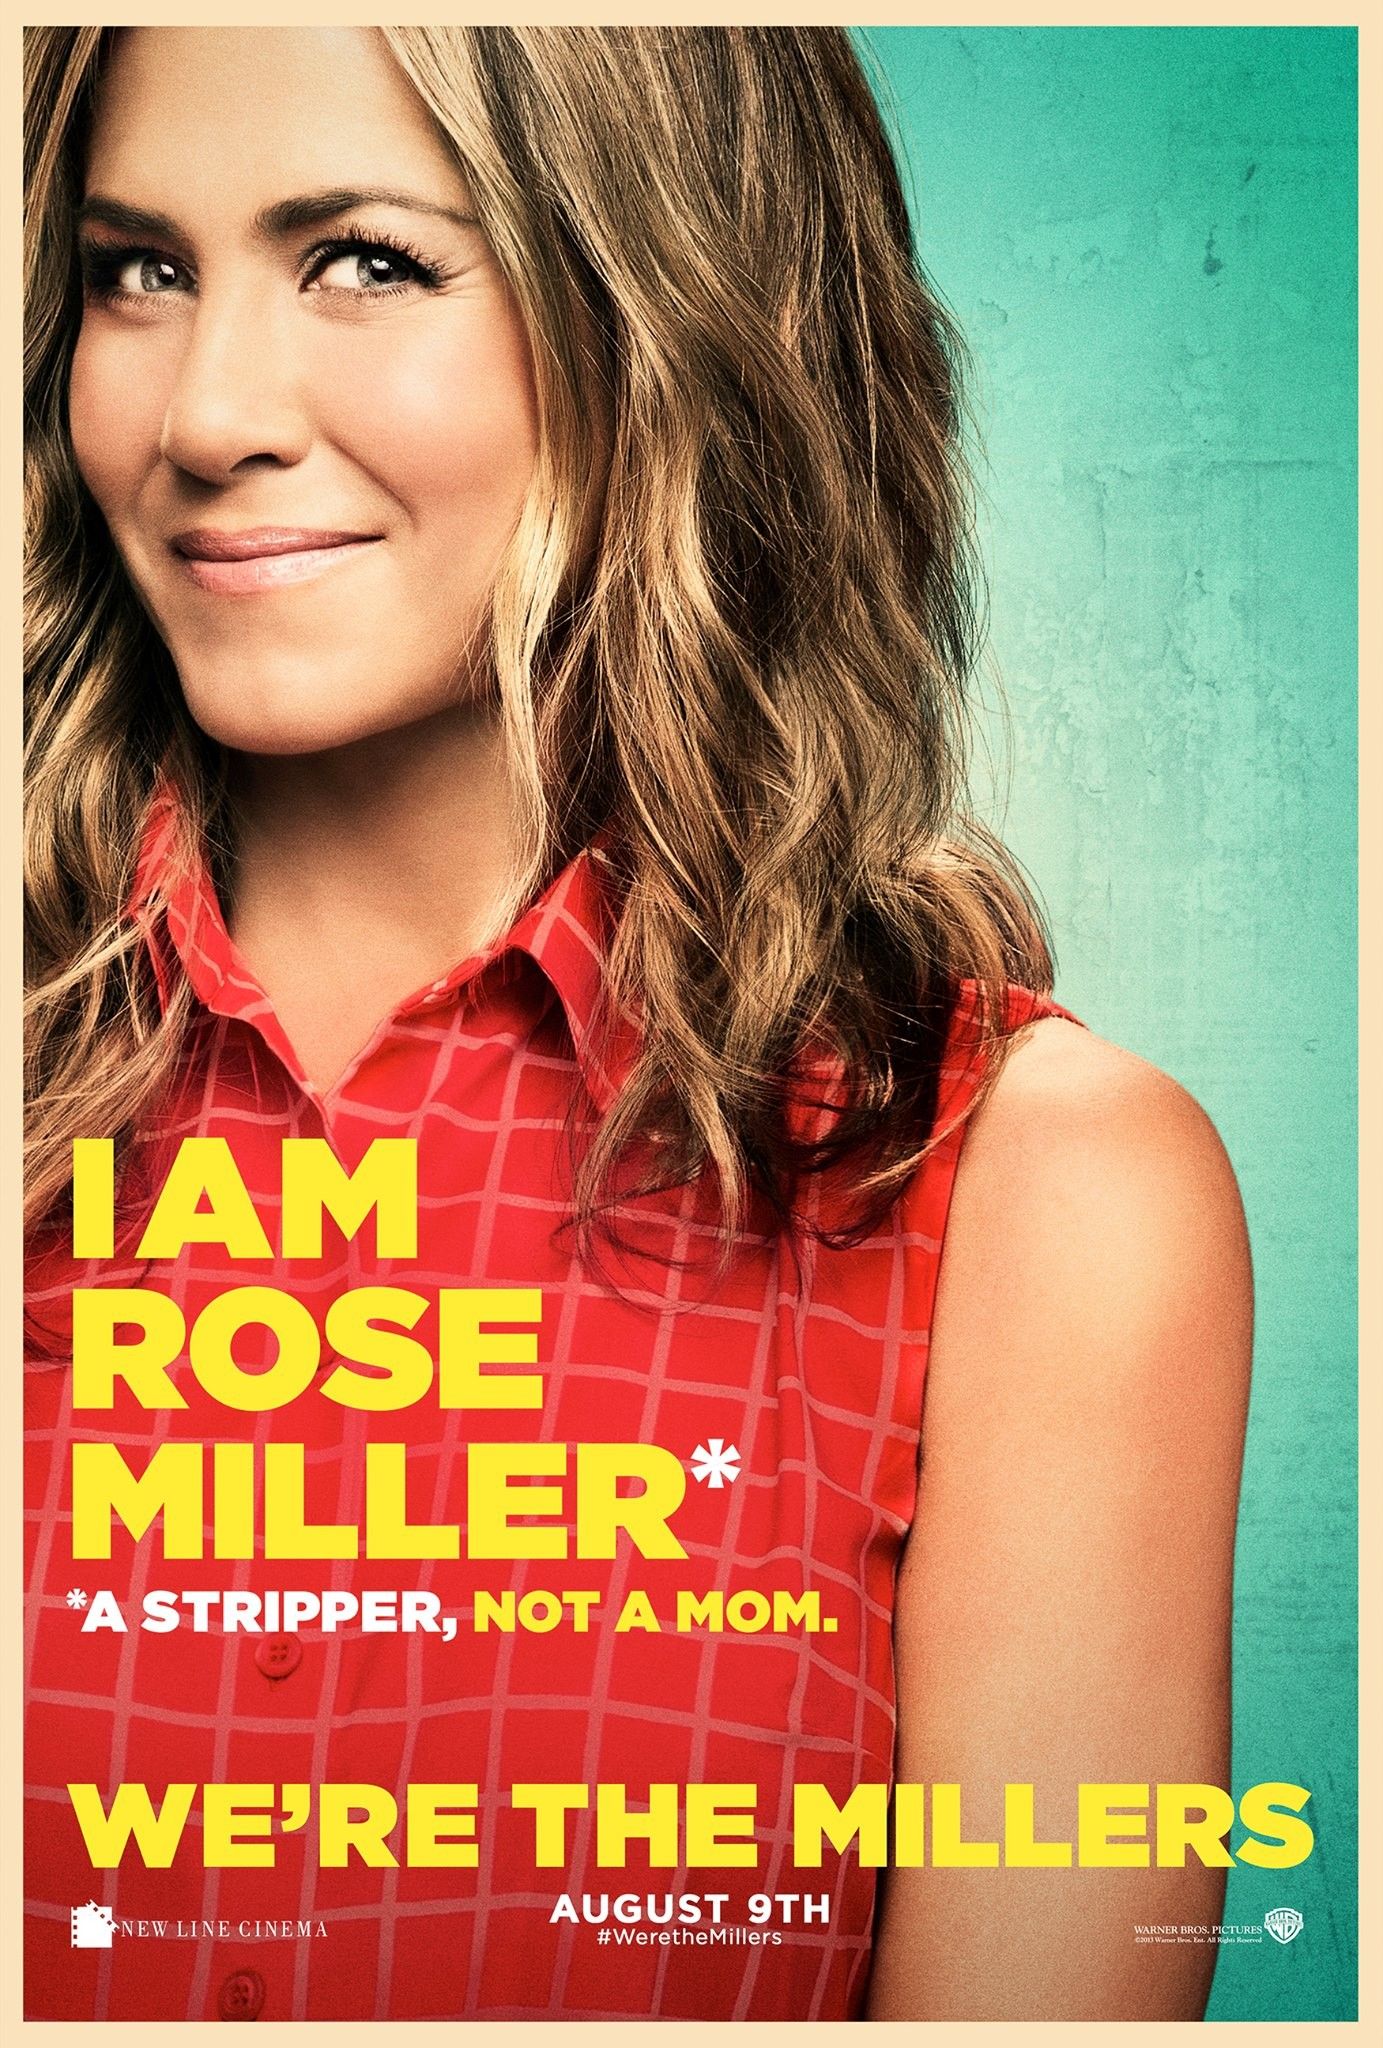 We're the Millers Jennifer Aniston Character poster